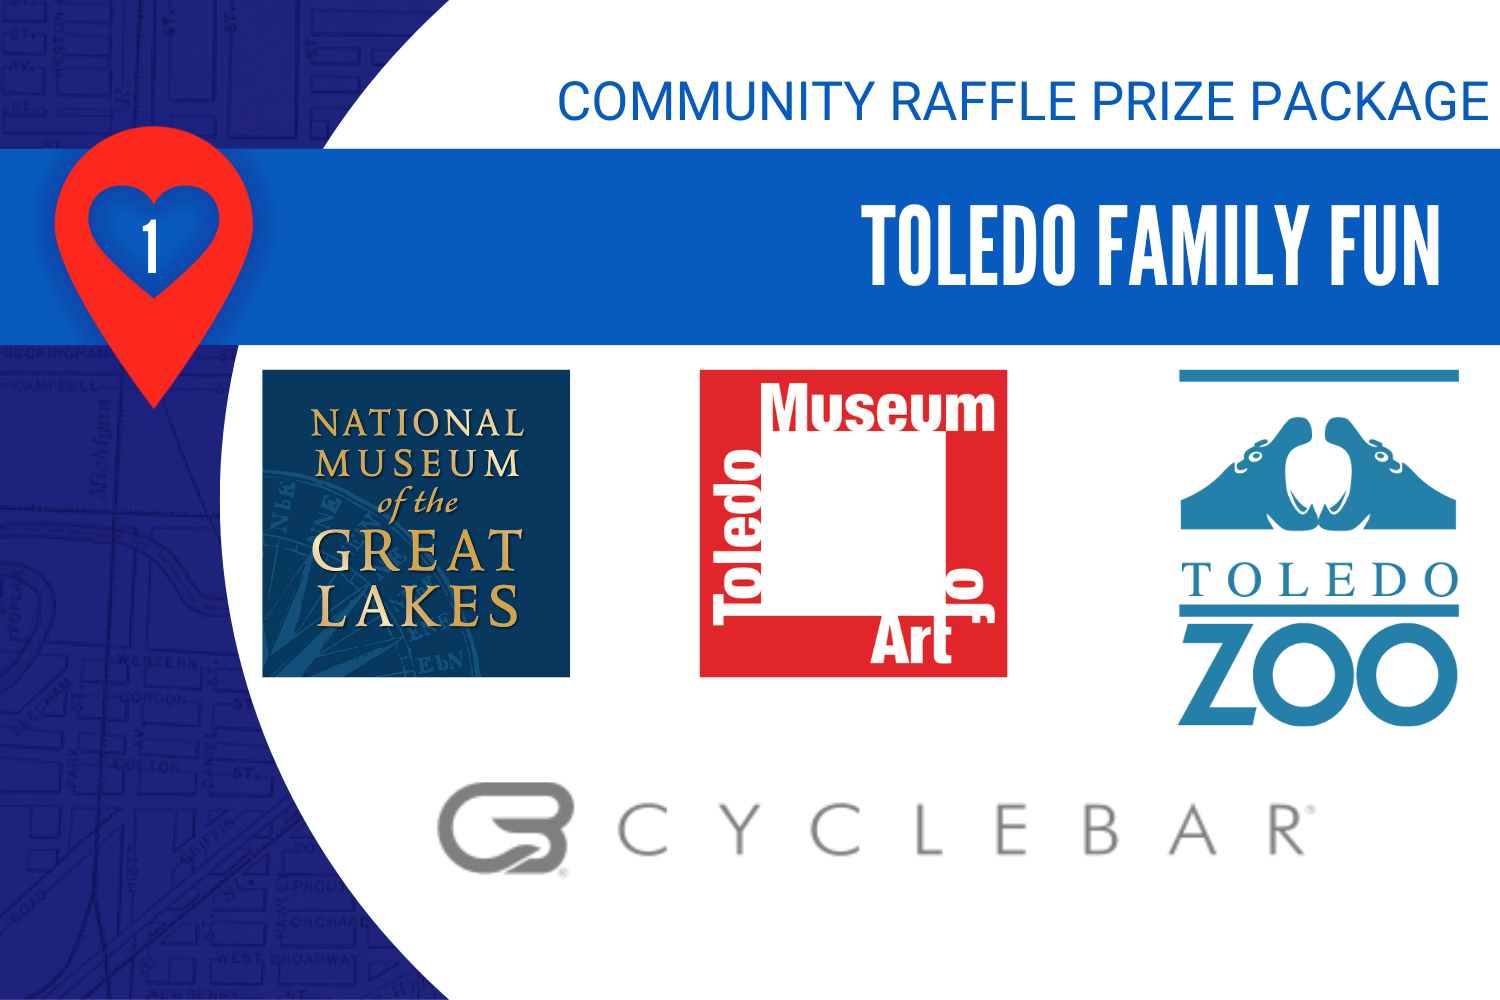 Community Raffle Package 1, Toledo Family Fun. Includes logos of the National Museum of the Great Lakes, Toledo Museum of Art, Toledo Zoo, and Cycle Bar